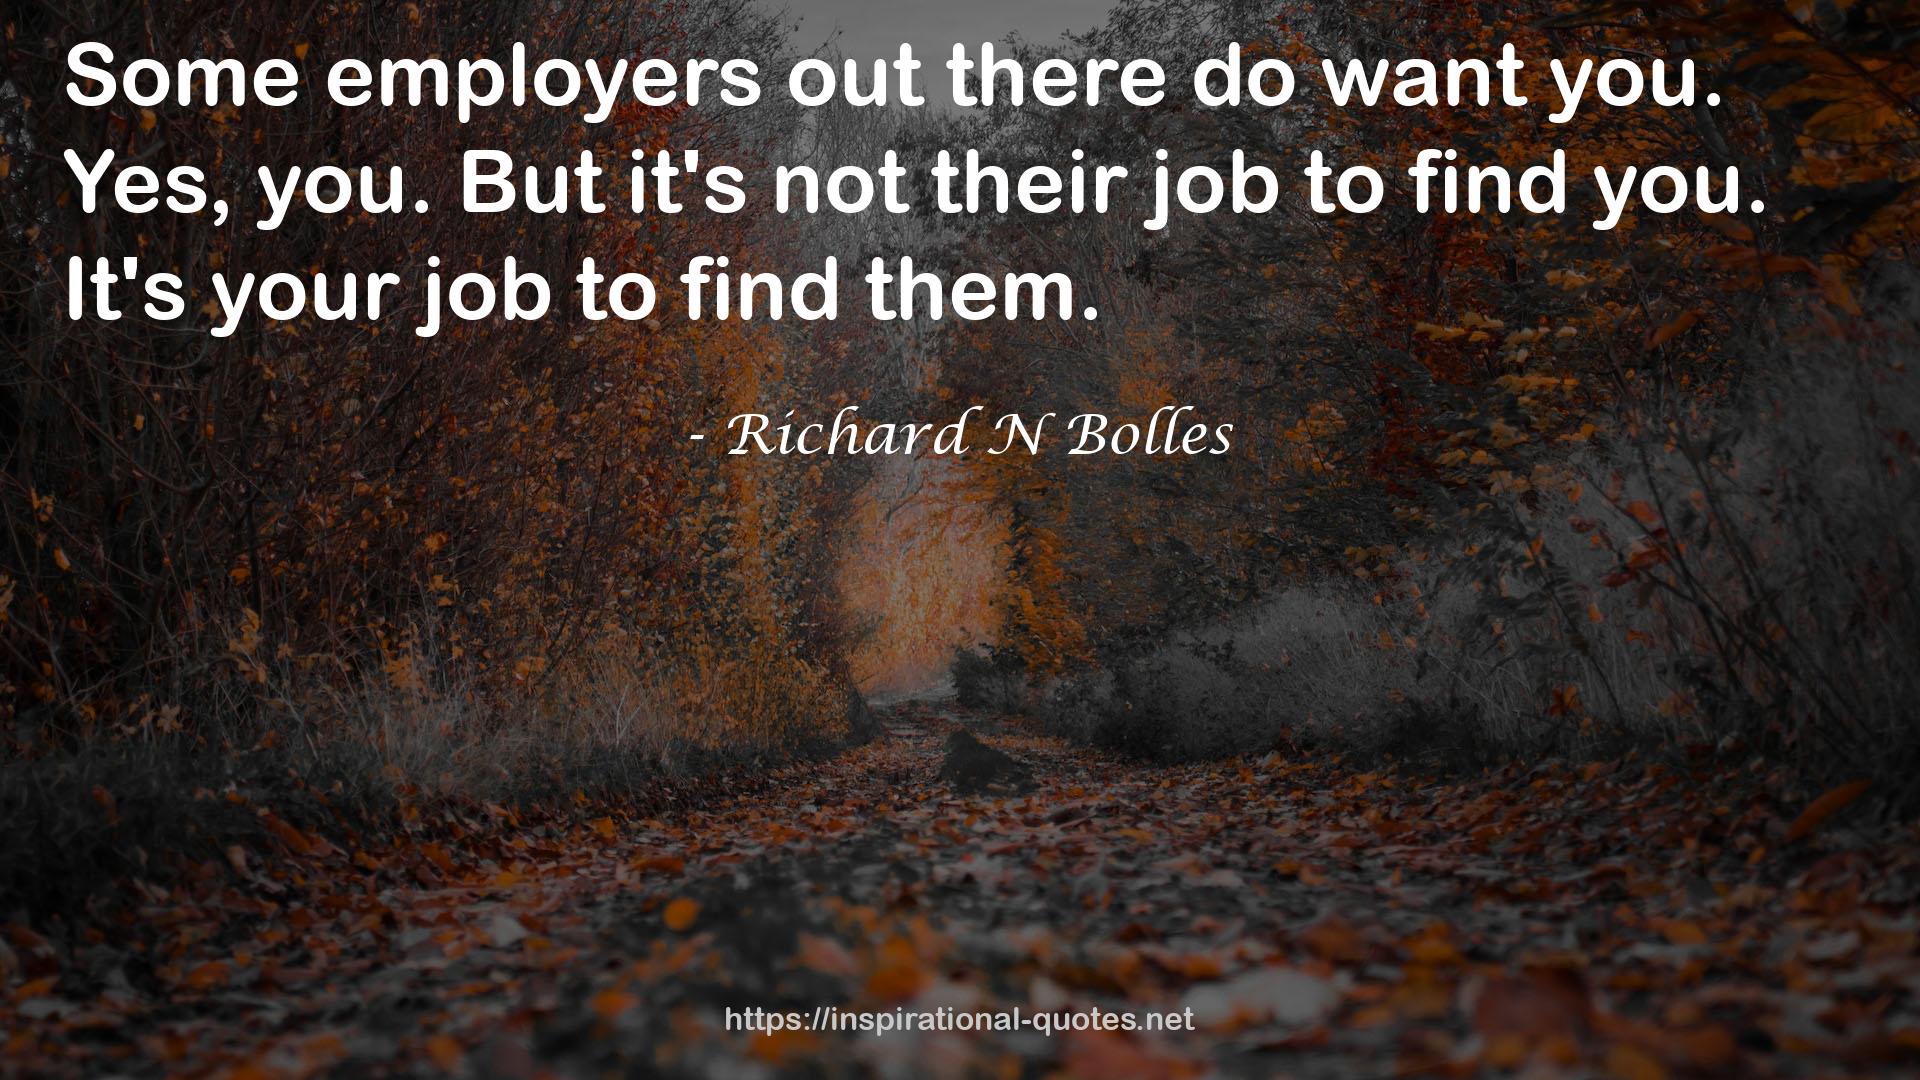 Richard N Bolles QUOTES